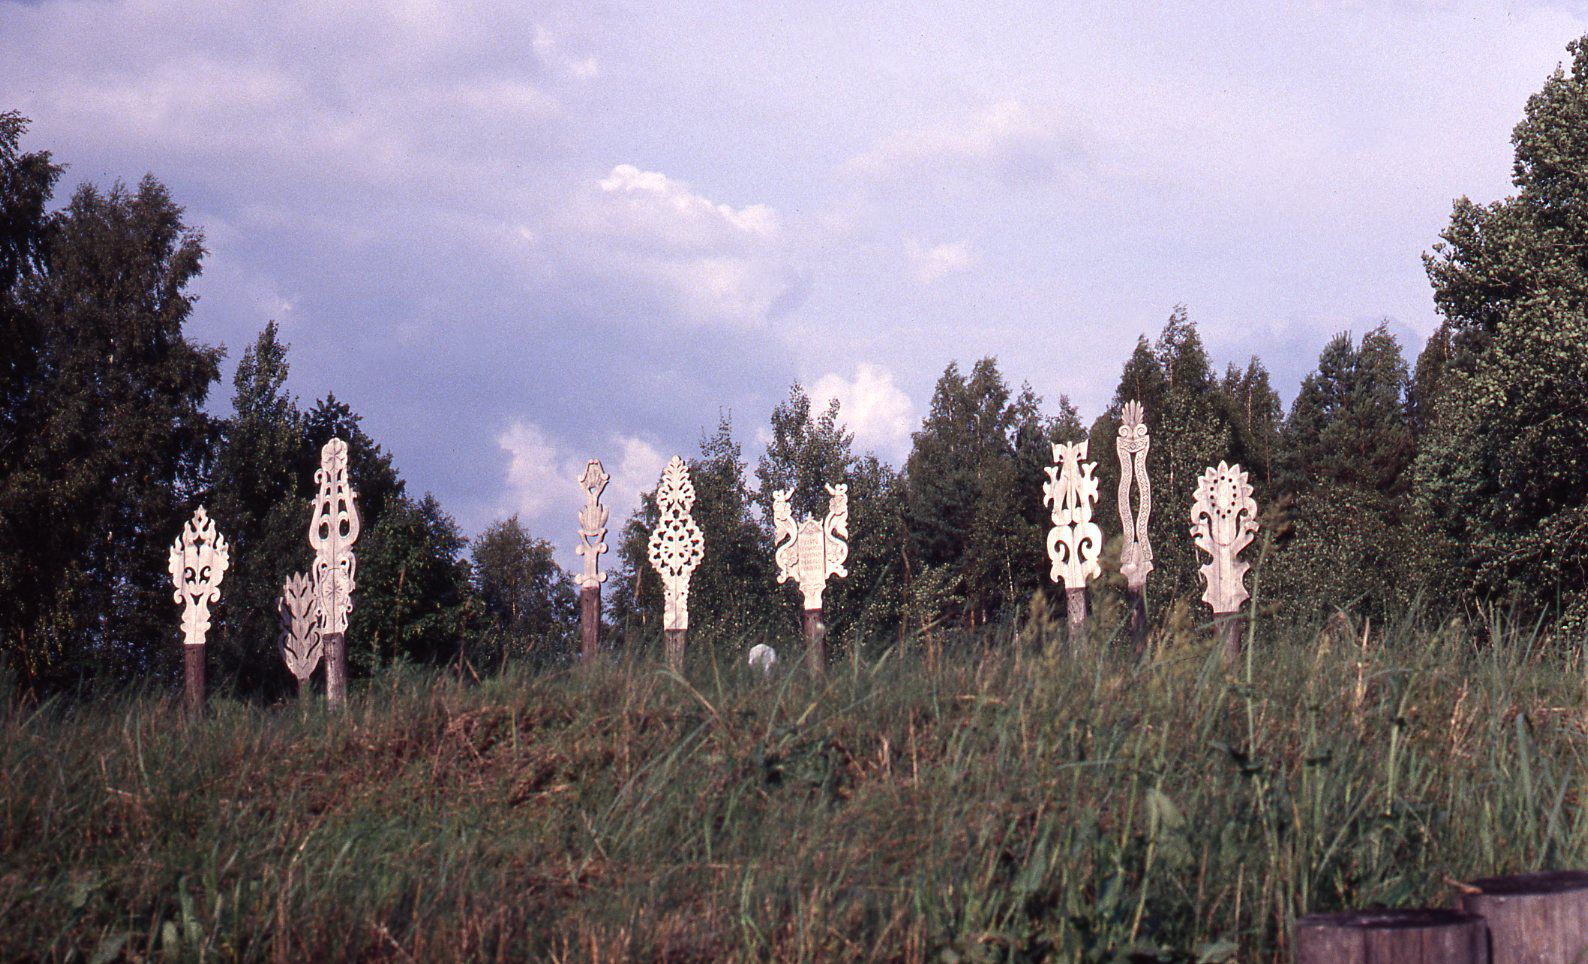 In 1976 fifteen carvers gathered in Usenai to install a memorial in honor of the Lithuanian army division who, in 1944, liberated the port city of Klaipeda occupied by the Germans. The 12 tall monuments, graceful in their curvilinear forms, were raised on a man-made mound, visible from the road. In contrast to the totem poles, these artifacts were cut out of thick boards and carved to resemble the ornamental distaff of a spinning wheel. The geometric patterns made these artifacts tolerable during Soviet occupation because they did not openly contravene Communist ideology. Because it was forbidden to make crosses and wayside shrines, artists turned to the “decorative and ideologically neutral distaff.” courtesy of Milda Richardson